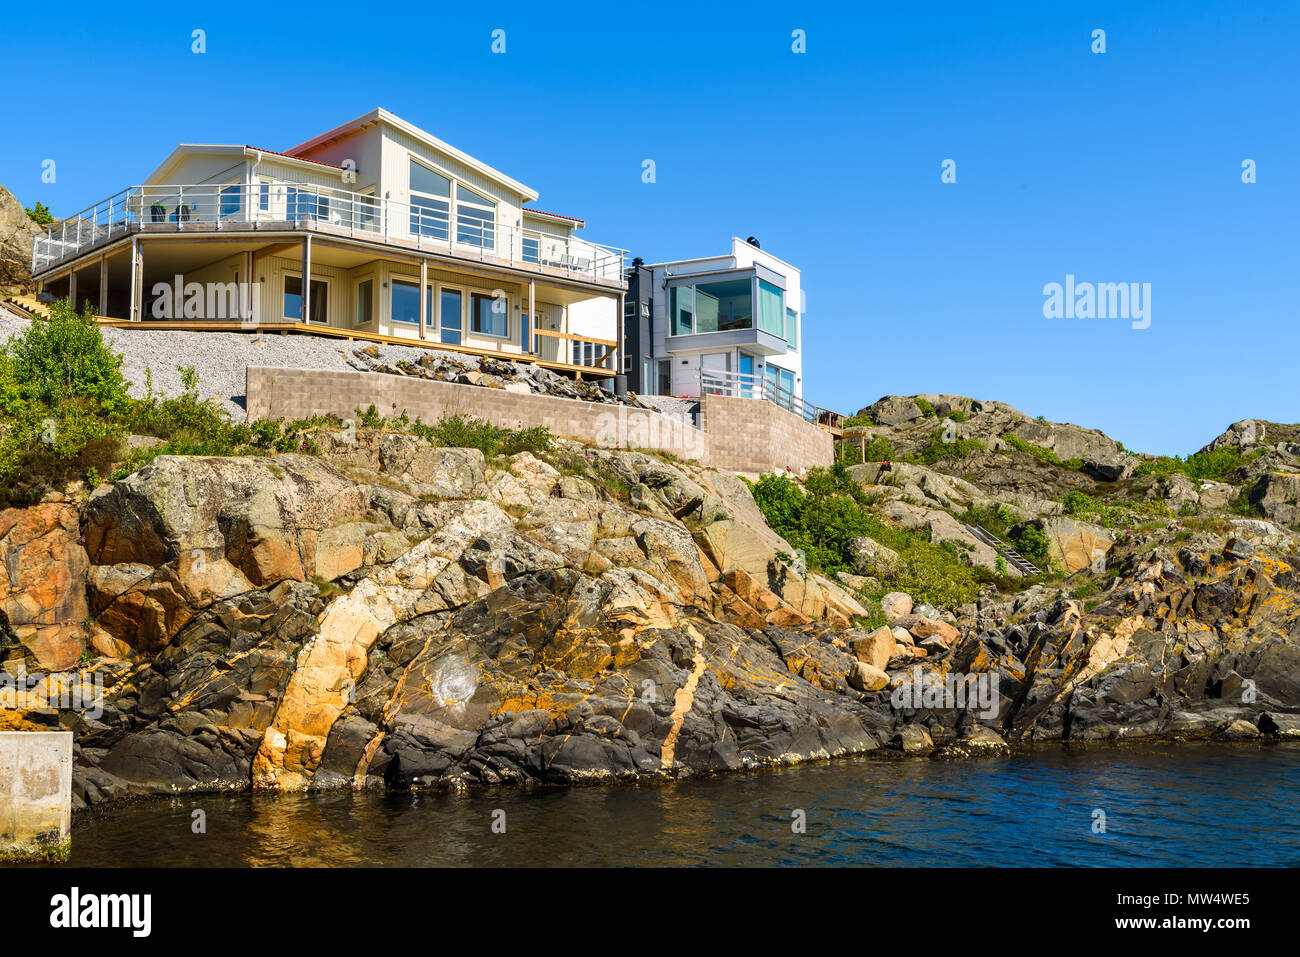 Ronnang, Tjorn, Sweden - May 18, 2018: Travel documentary of everyday life and place. Coastal real estate development is visible everywhere in the reg Stock Photo